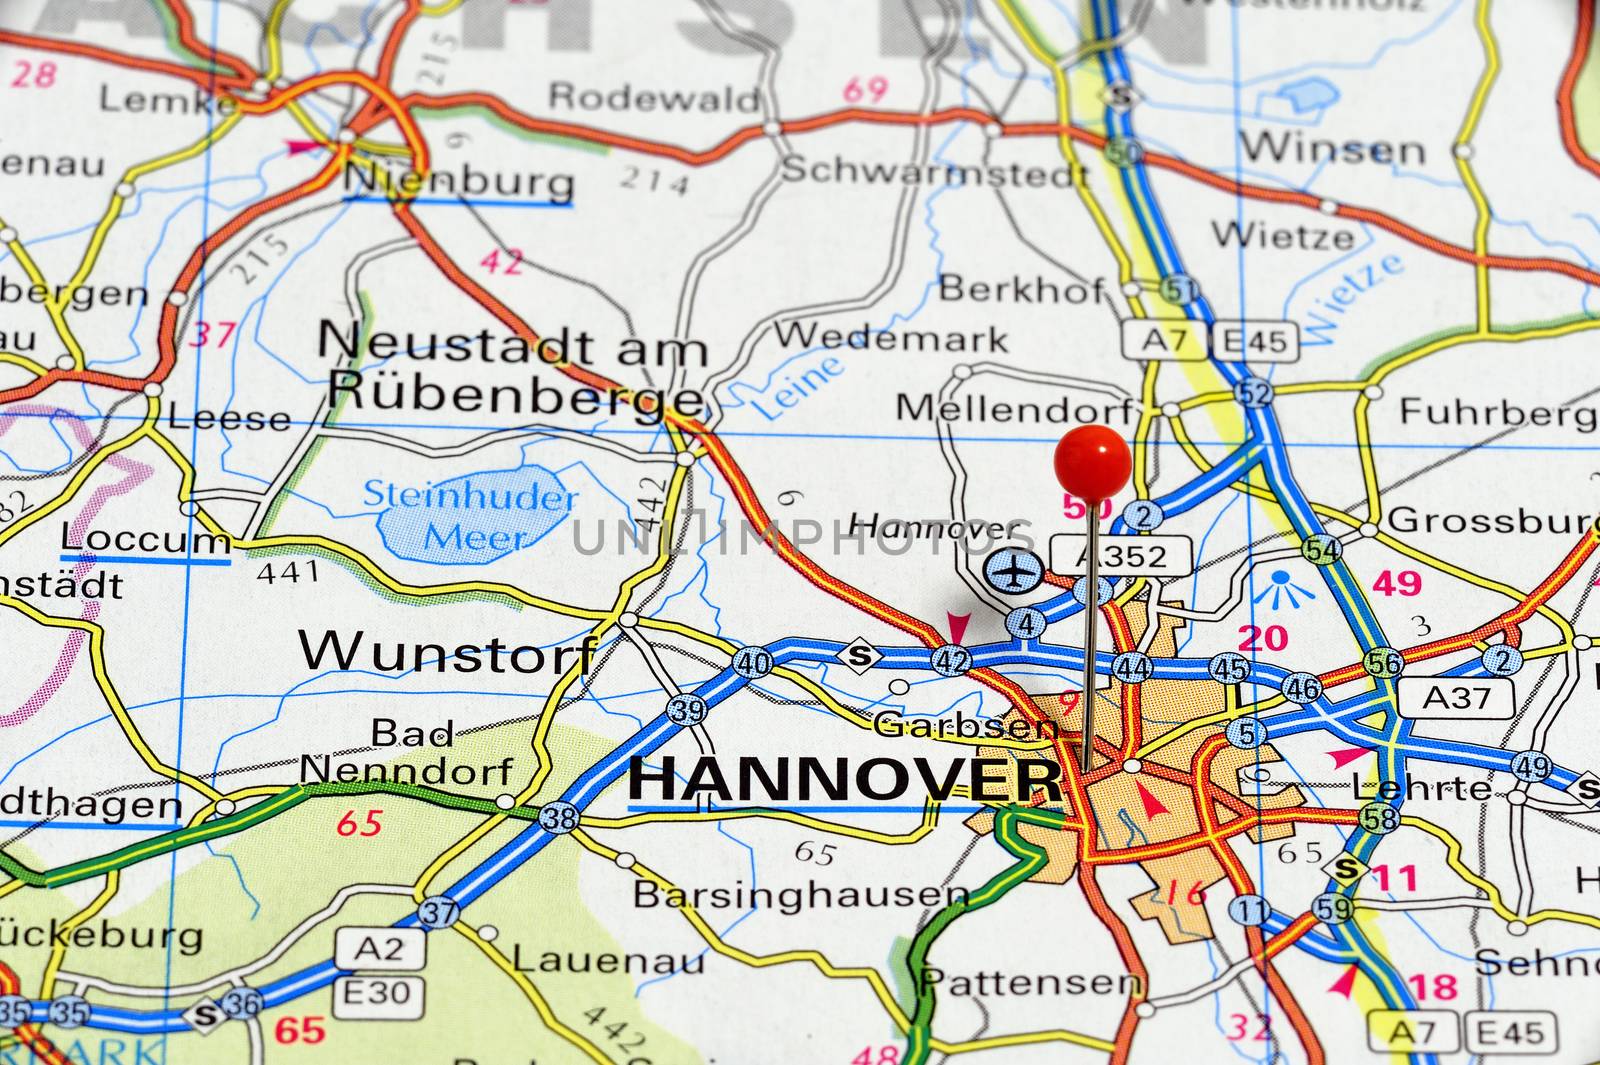 European cities on map series: Hannover